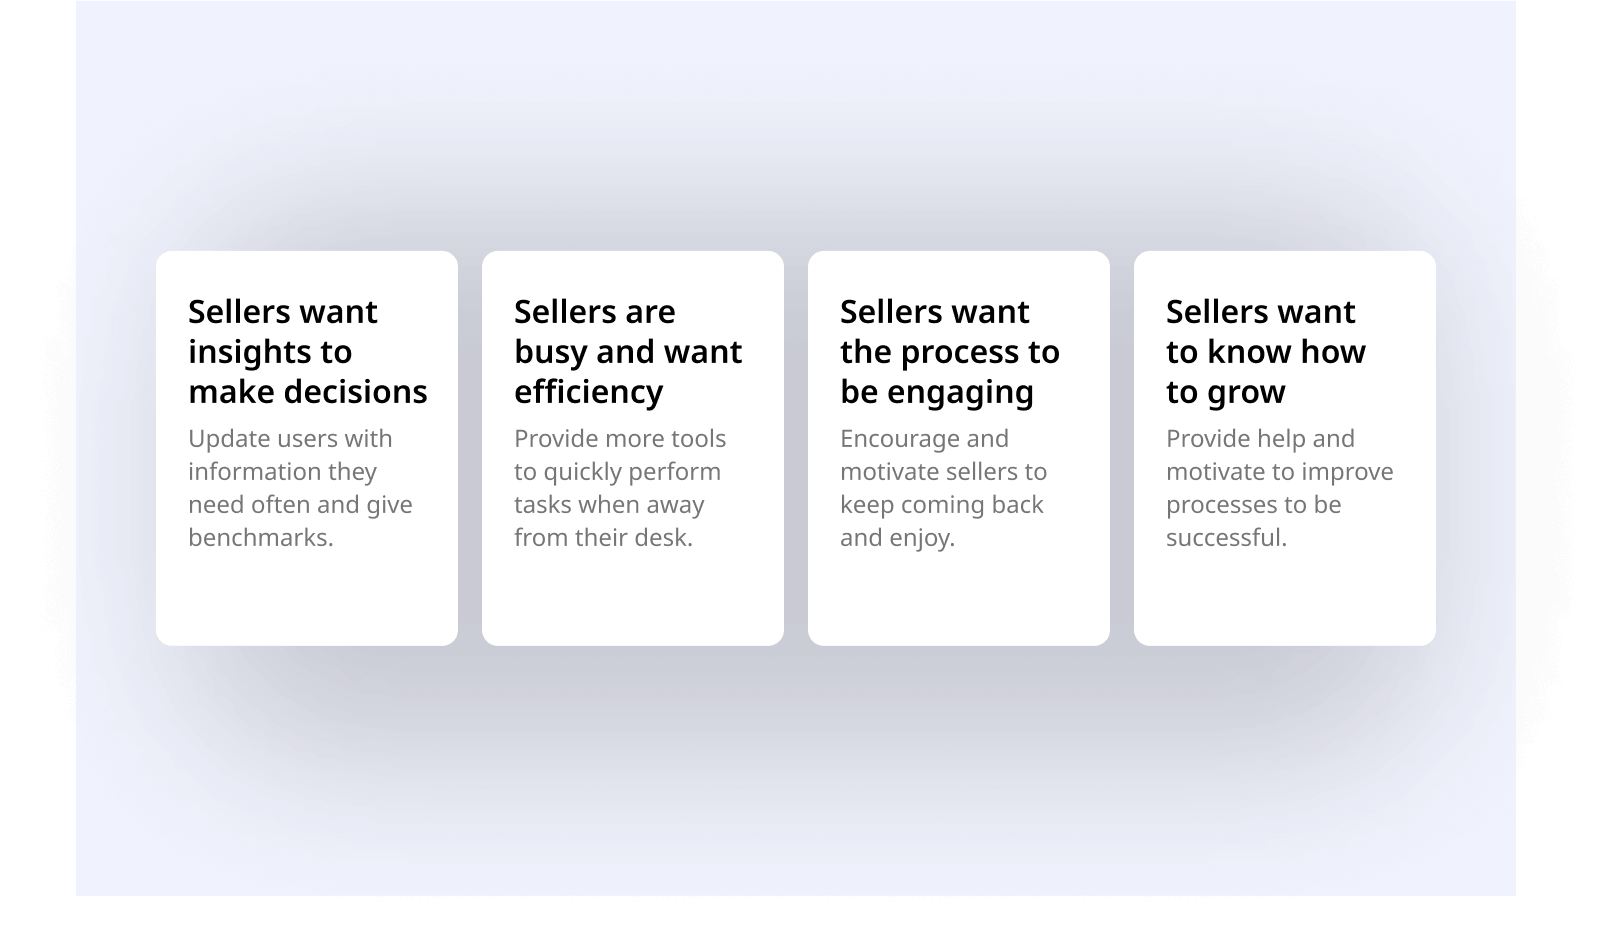 Seller needs: insights to make decisions, efficiency, engaging process, recommendations how to grow